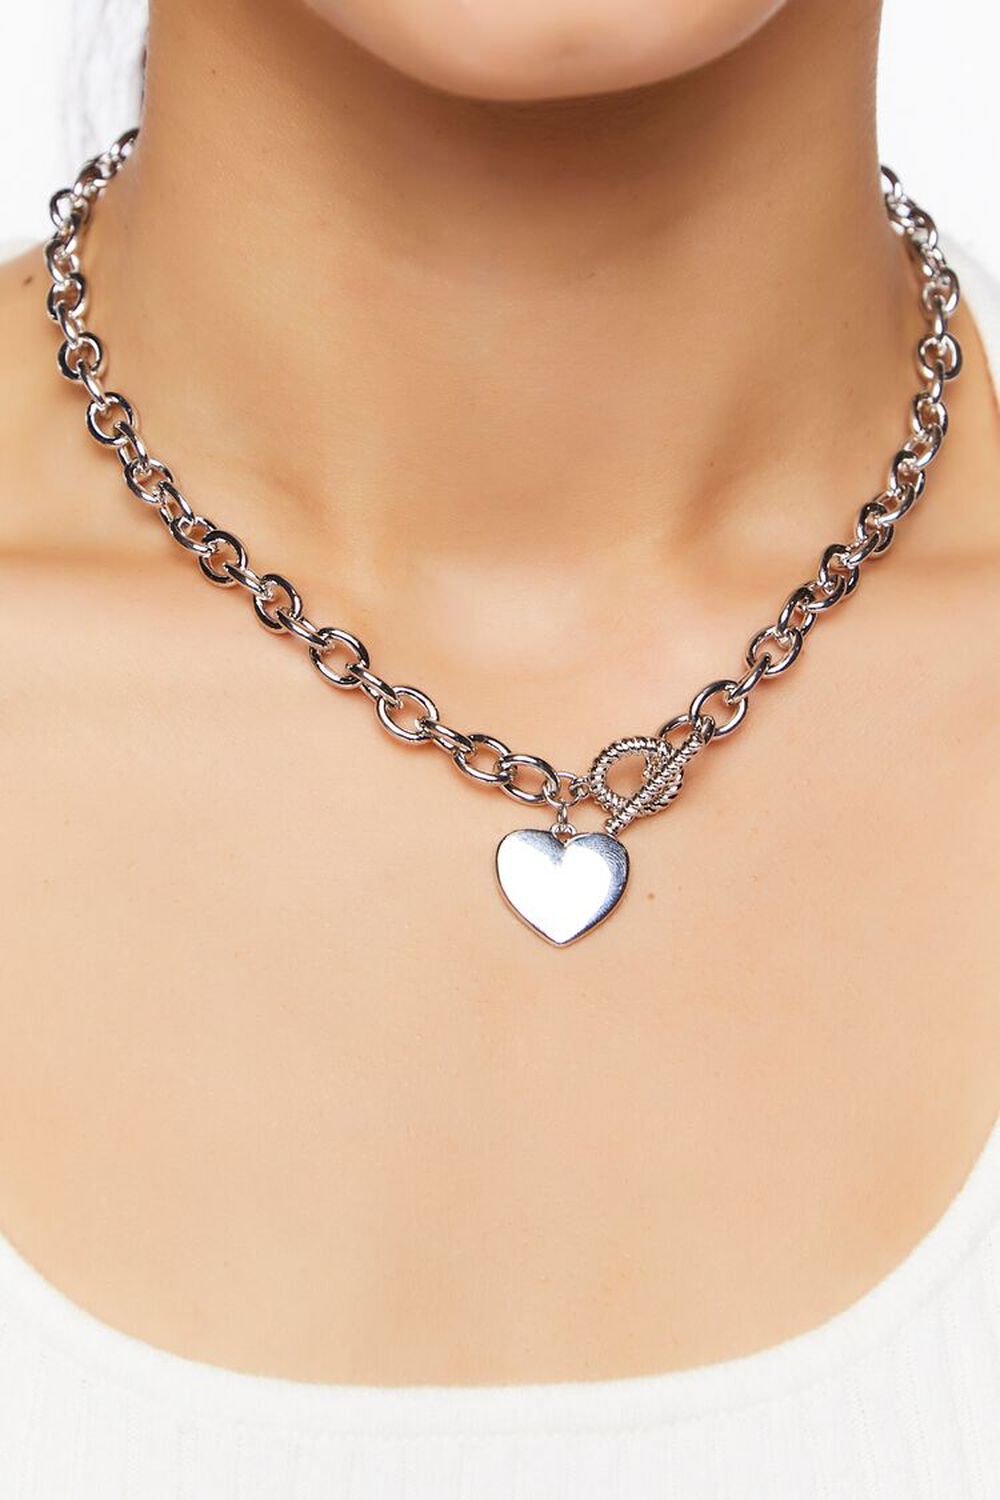 SILVER Heart Pendant Toggle Necklace, image 1